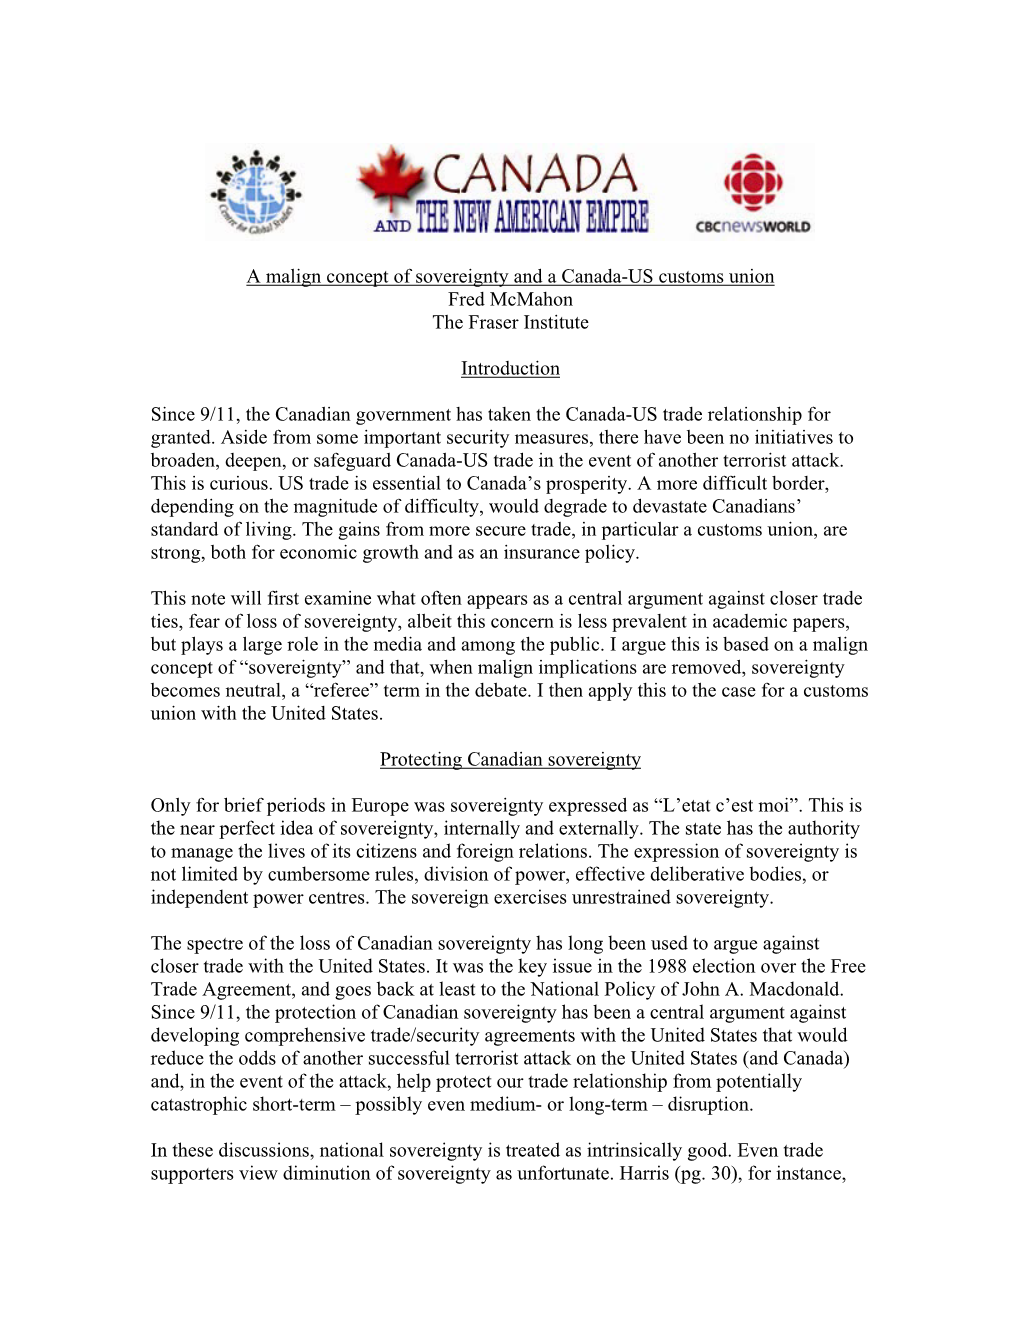 A Malign Concept of Sovereignty and a Canada-US Customs Union Fred Mcmahon the Fraser Institute